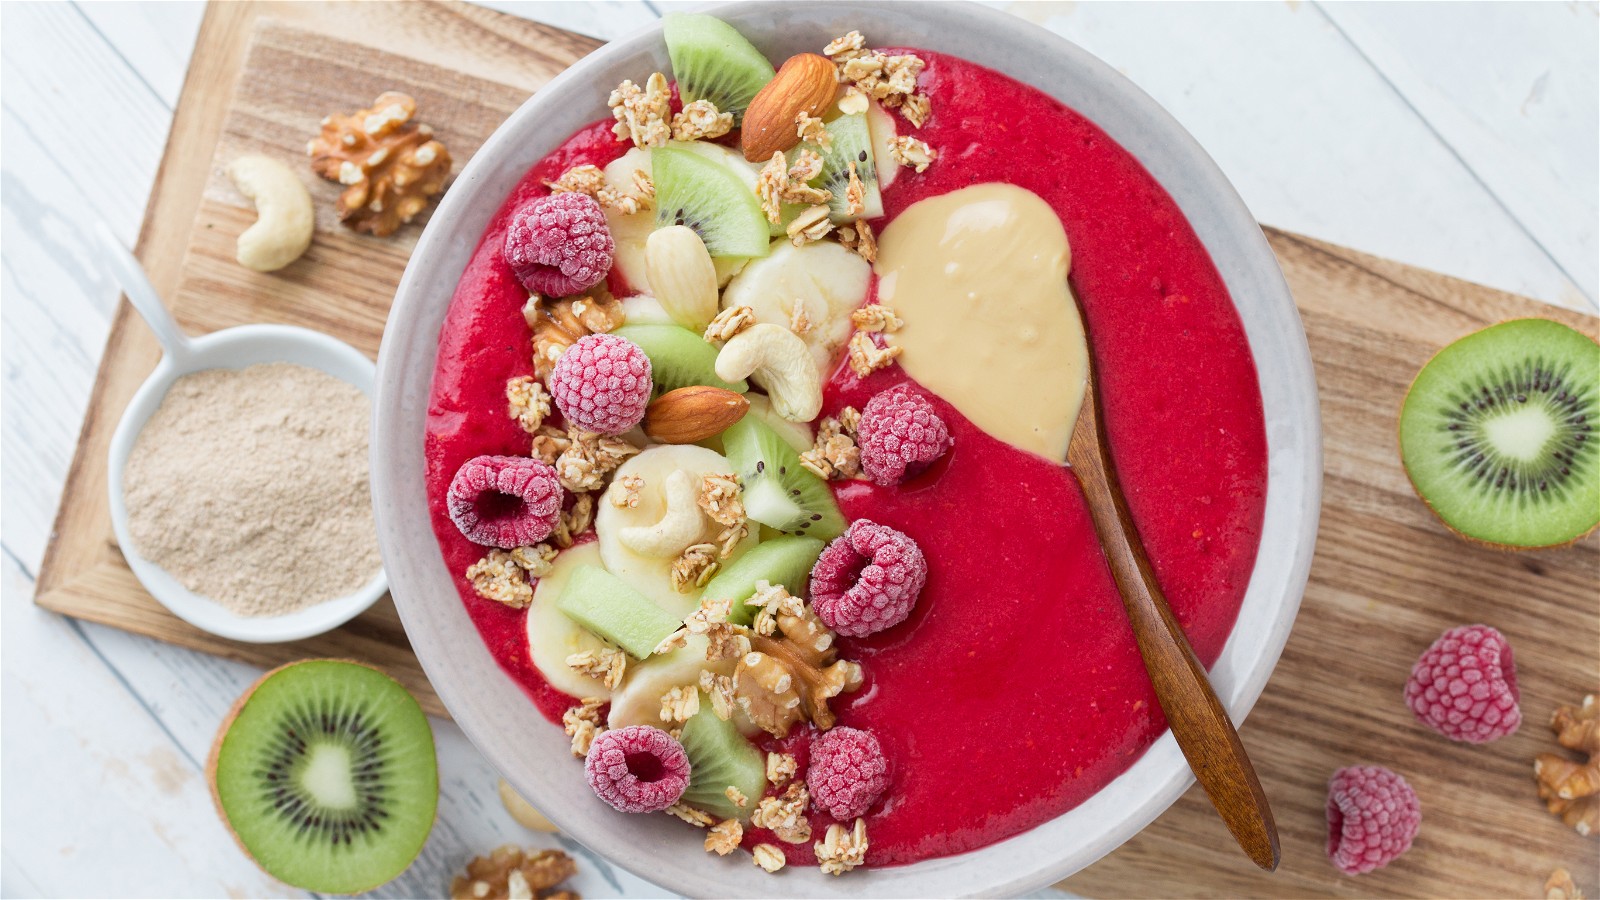 Image of Himbeer Smoothiebowl